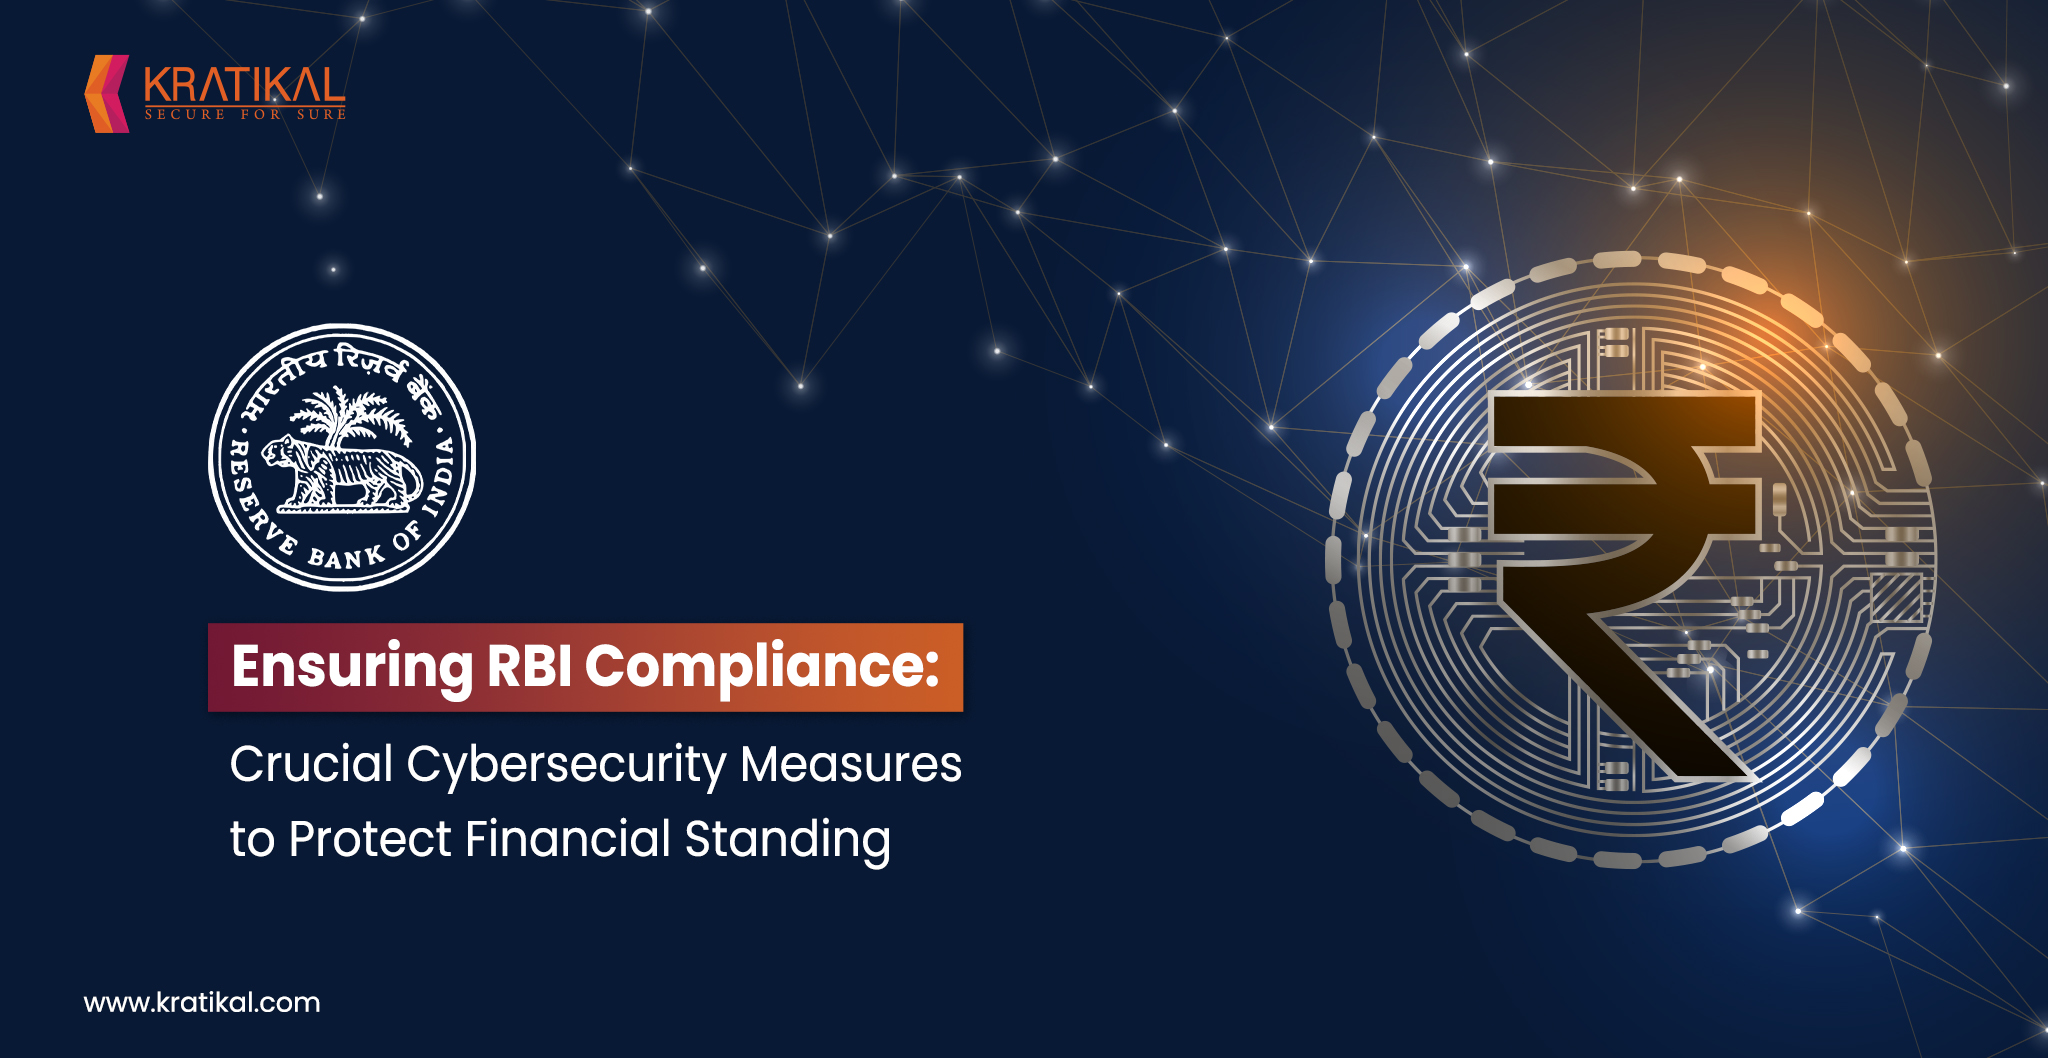 Ensuring RBI Compliance: Crucial Cybersecurity Measure to Protect Financial Standing